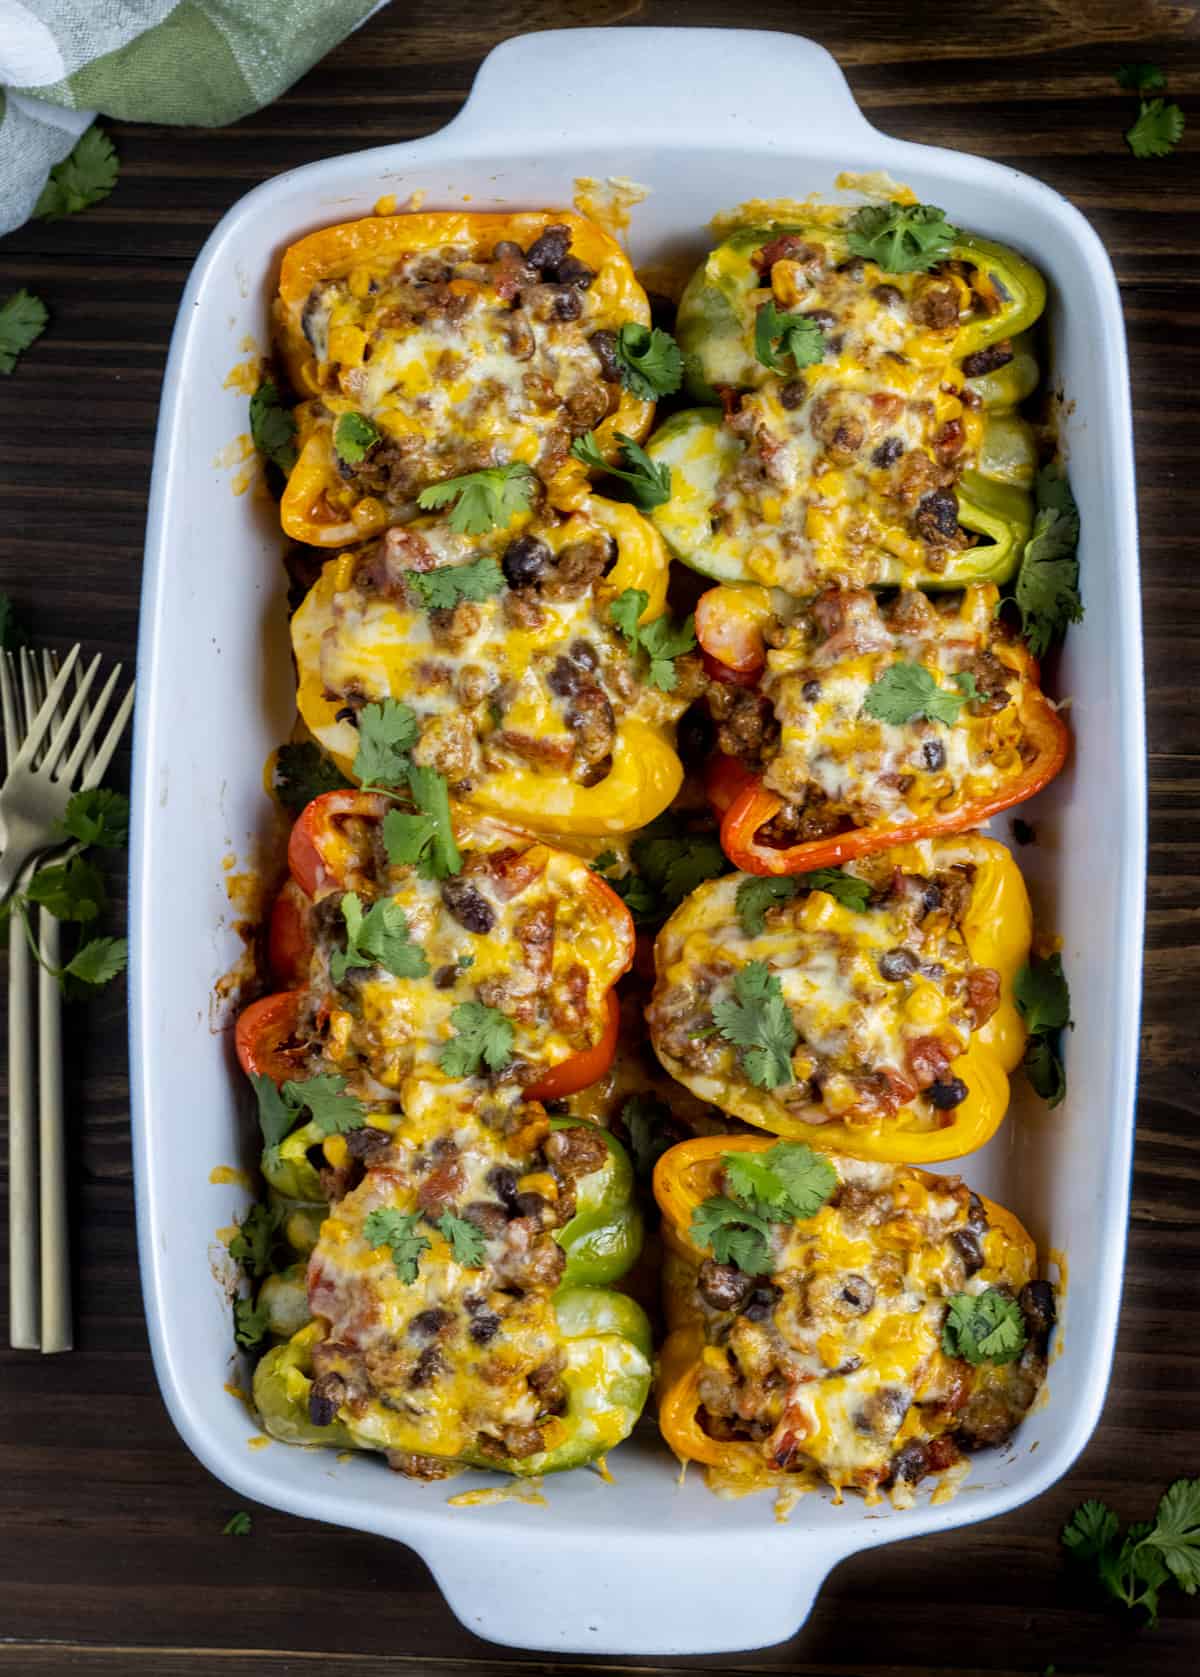 Eight taco stuffed peppers in a baking dish next to forks and a towel.